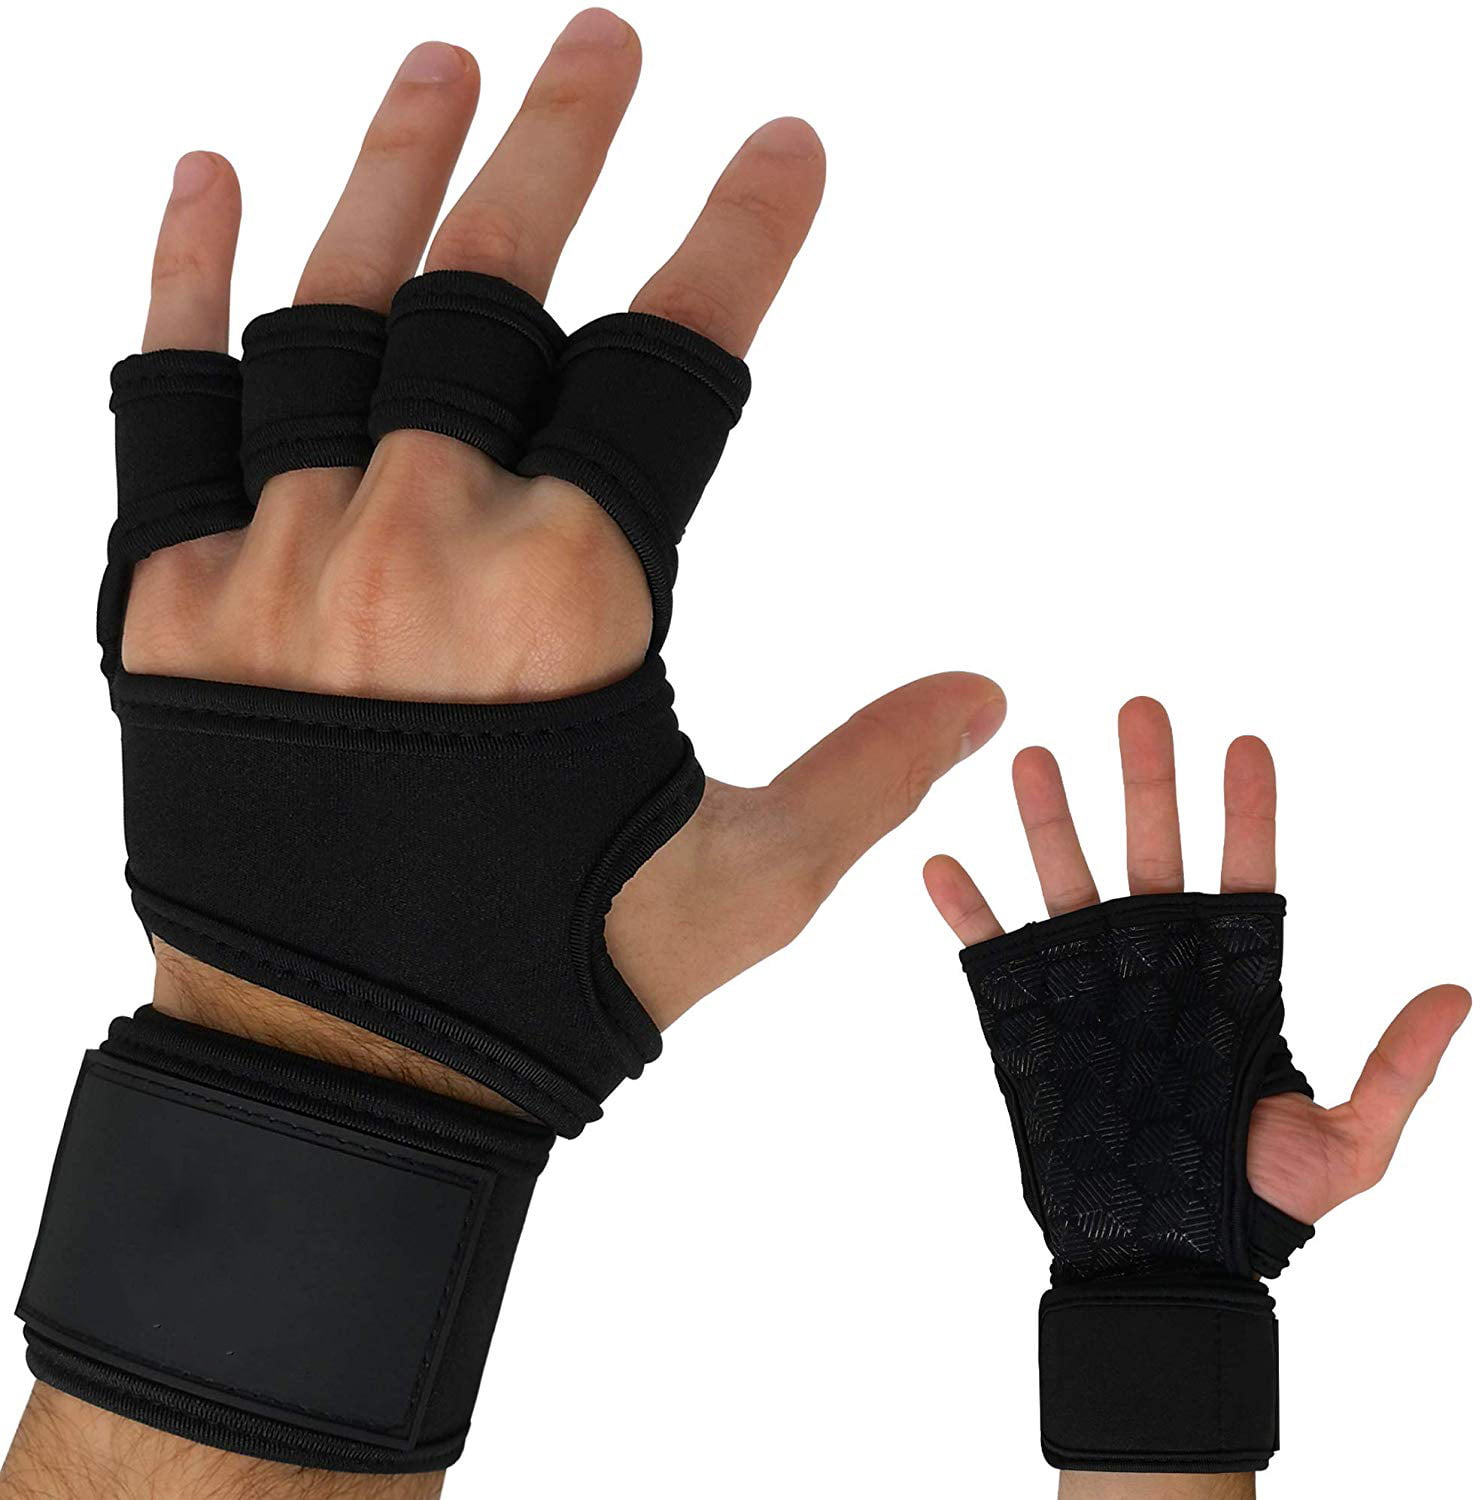 Weight Lifting Gloves With Wrist Support For Gym Training Full Palm Protection 